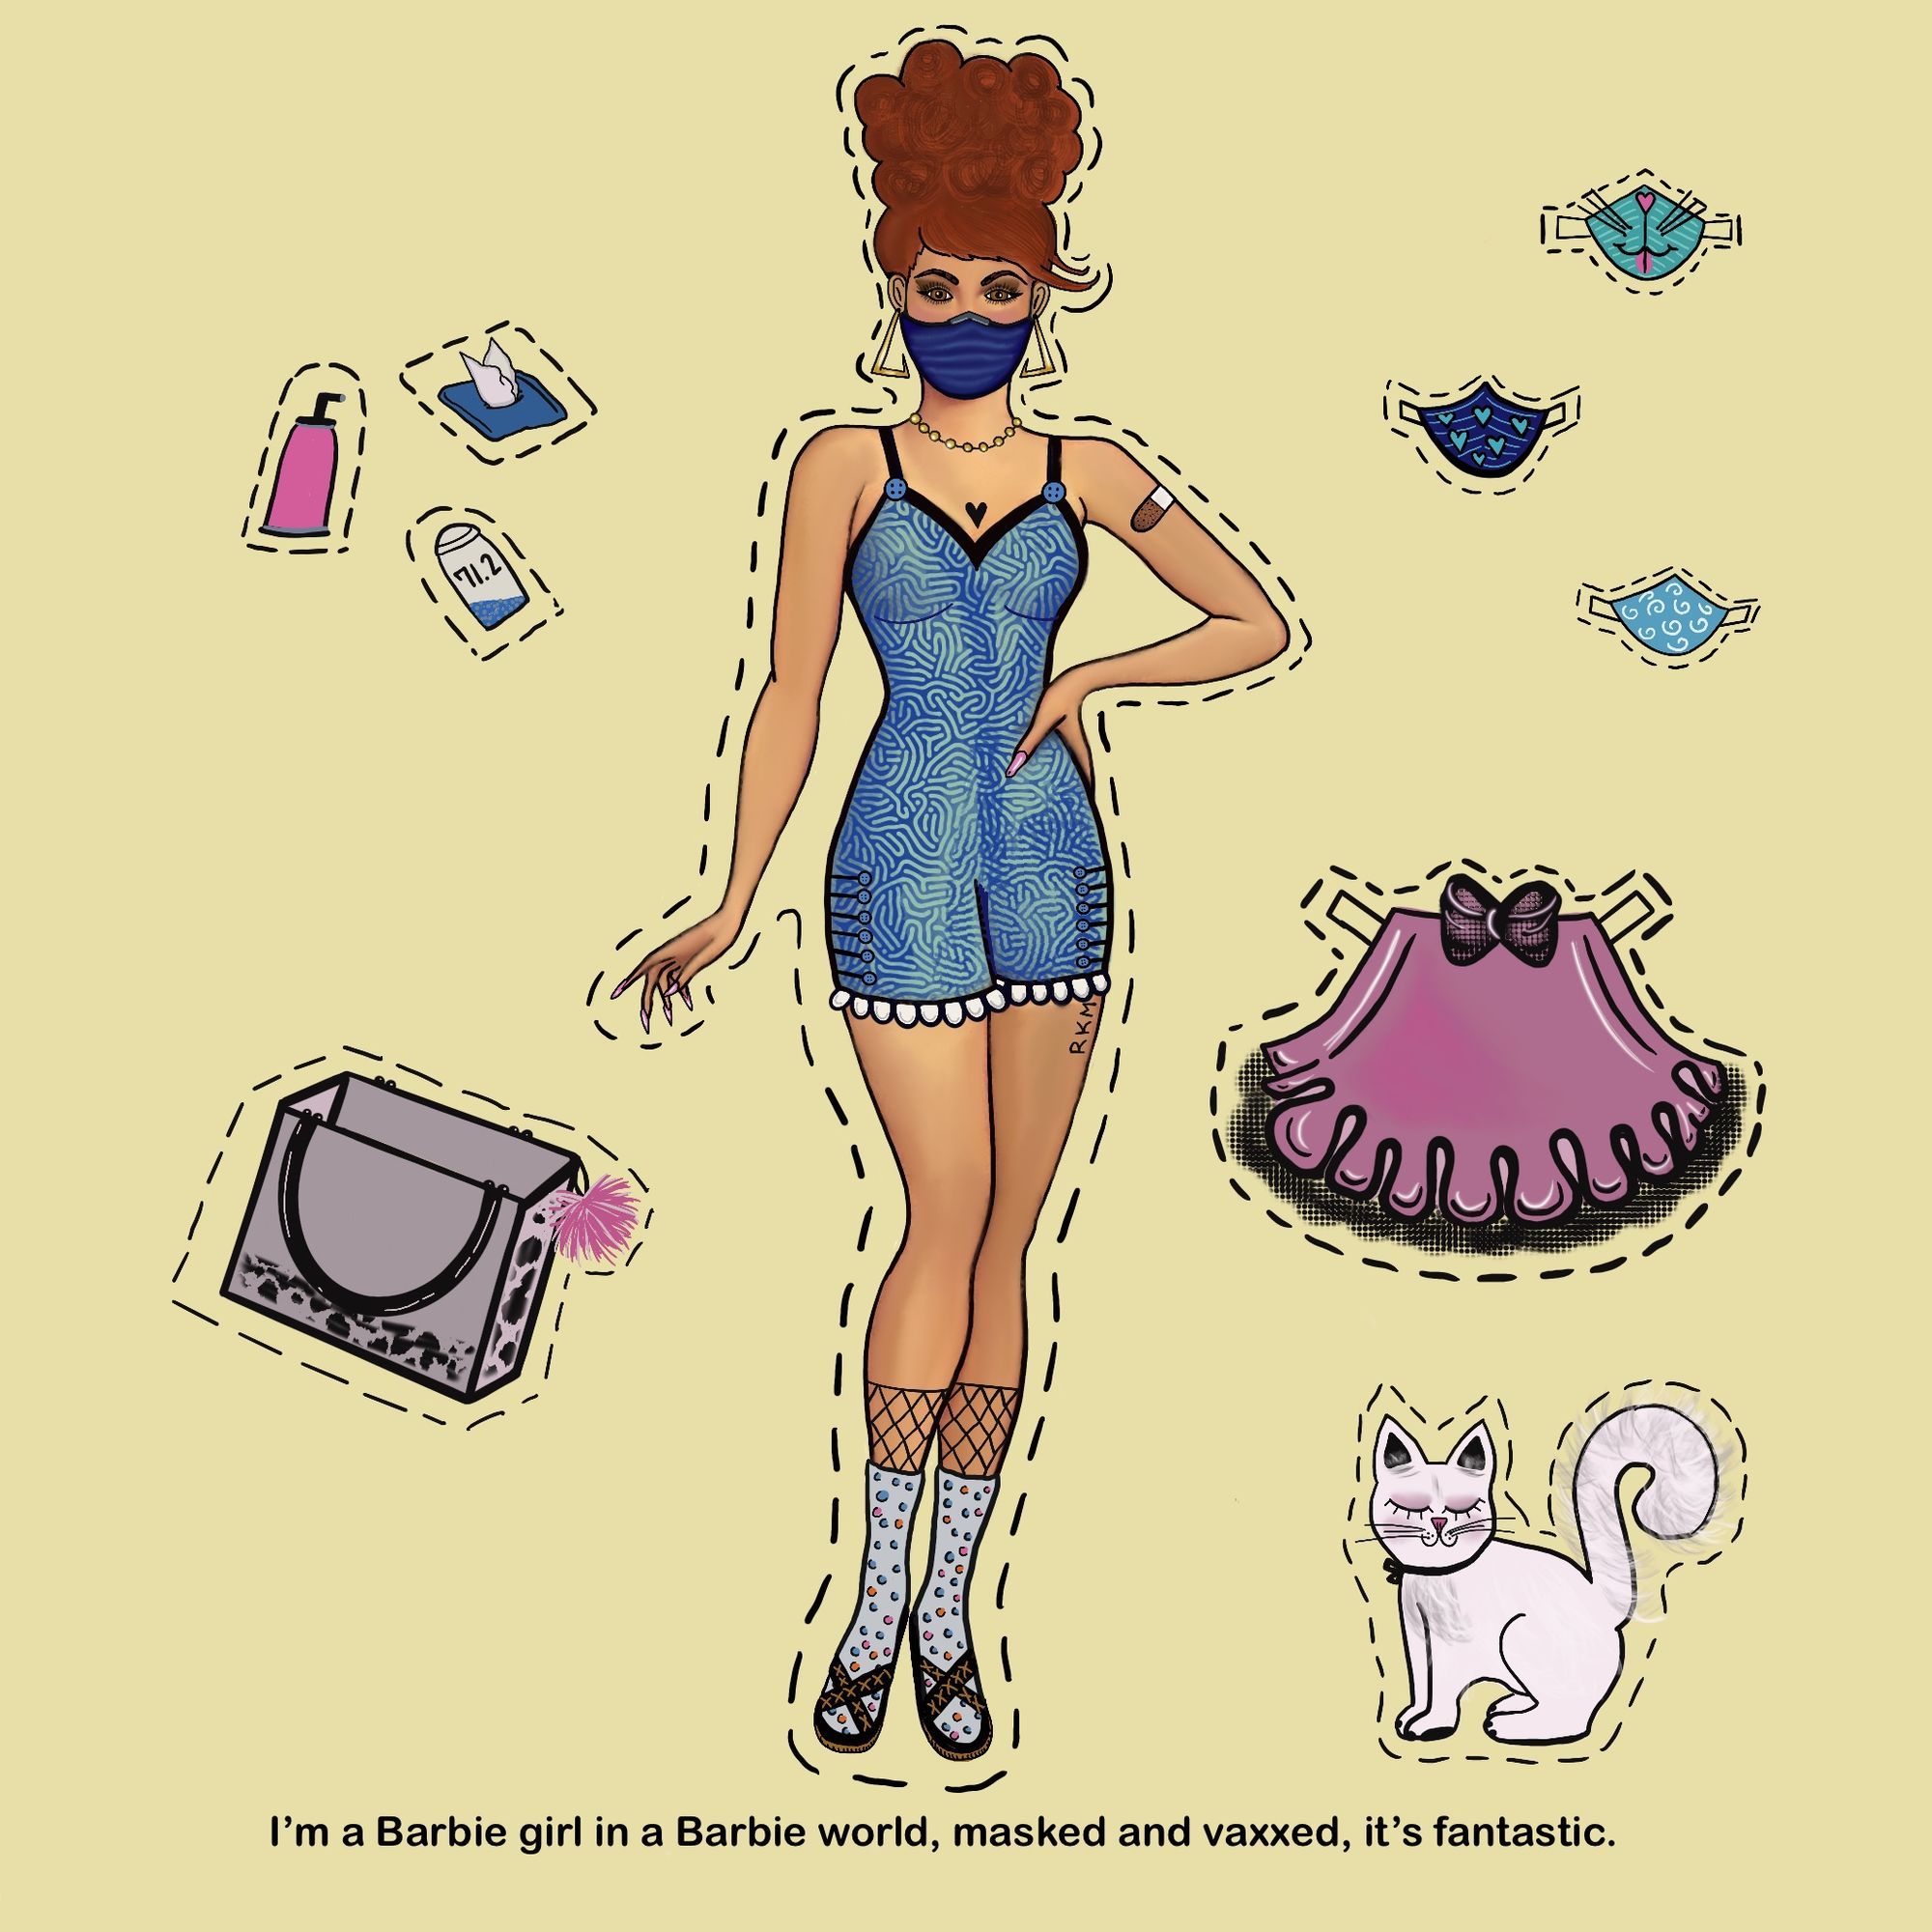 Paper doll with cut-outs that include masks, tissues, hand sanitizer, and more. The bottom reads: "I'm a Barbie girl in a Barbie world, masked and vaxxed, it's fantastic."